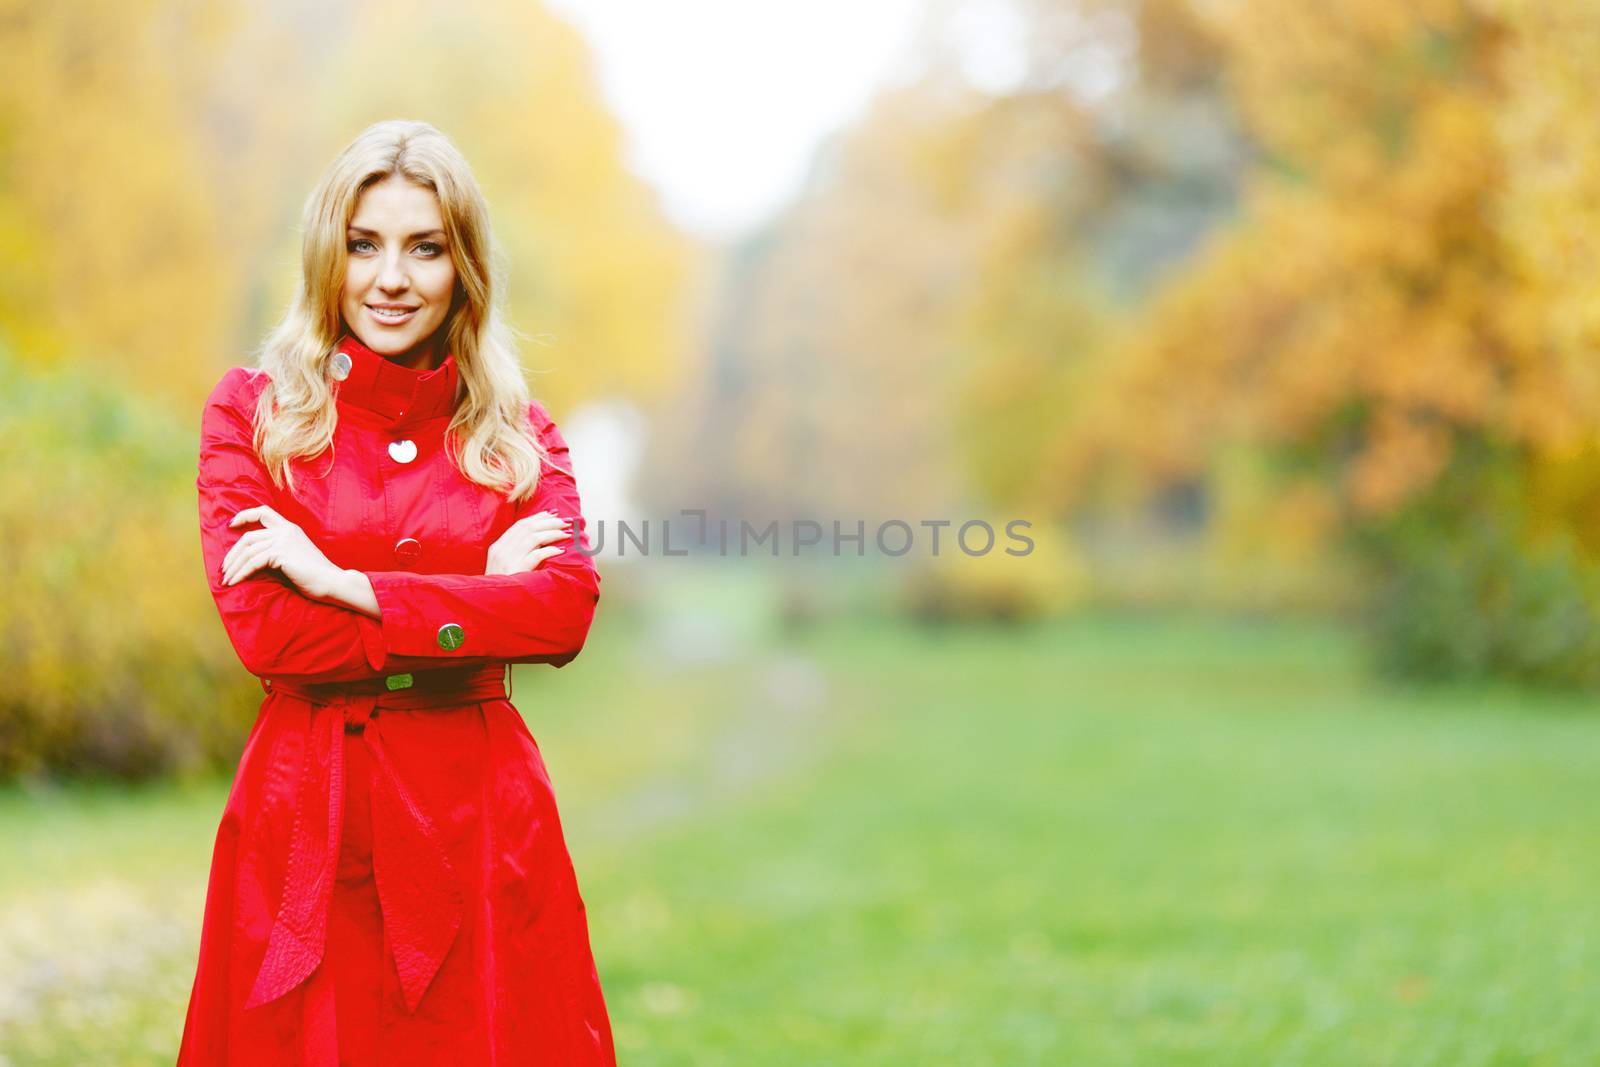 Young woman in red coat walking in autumn park